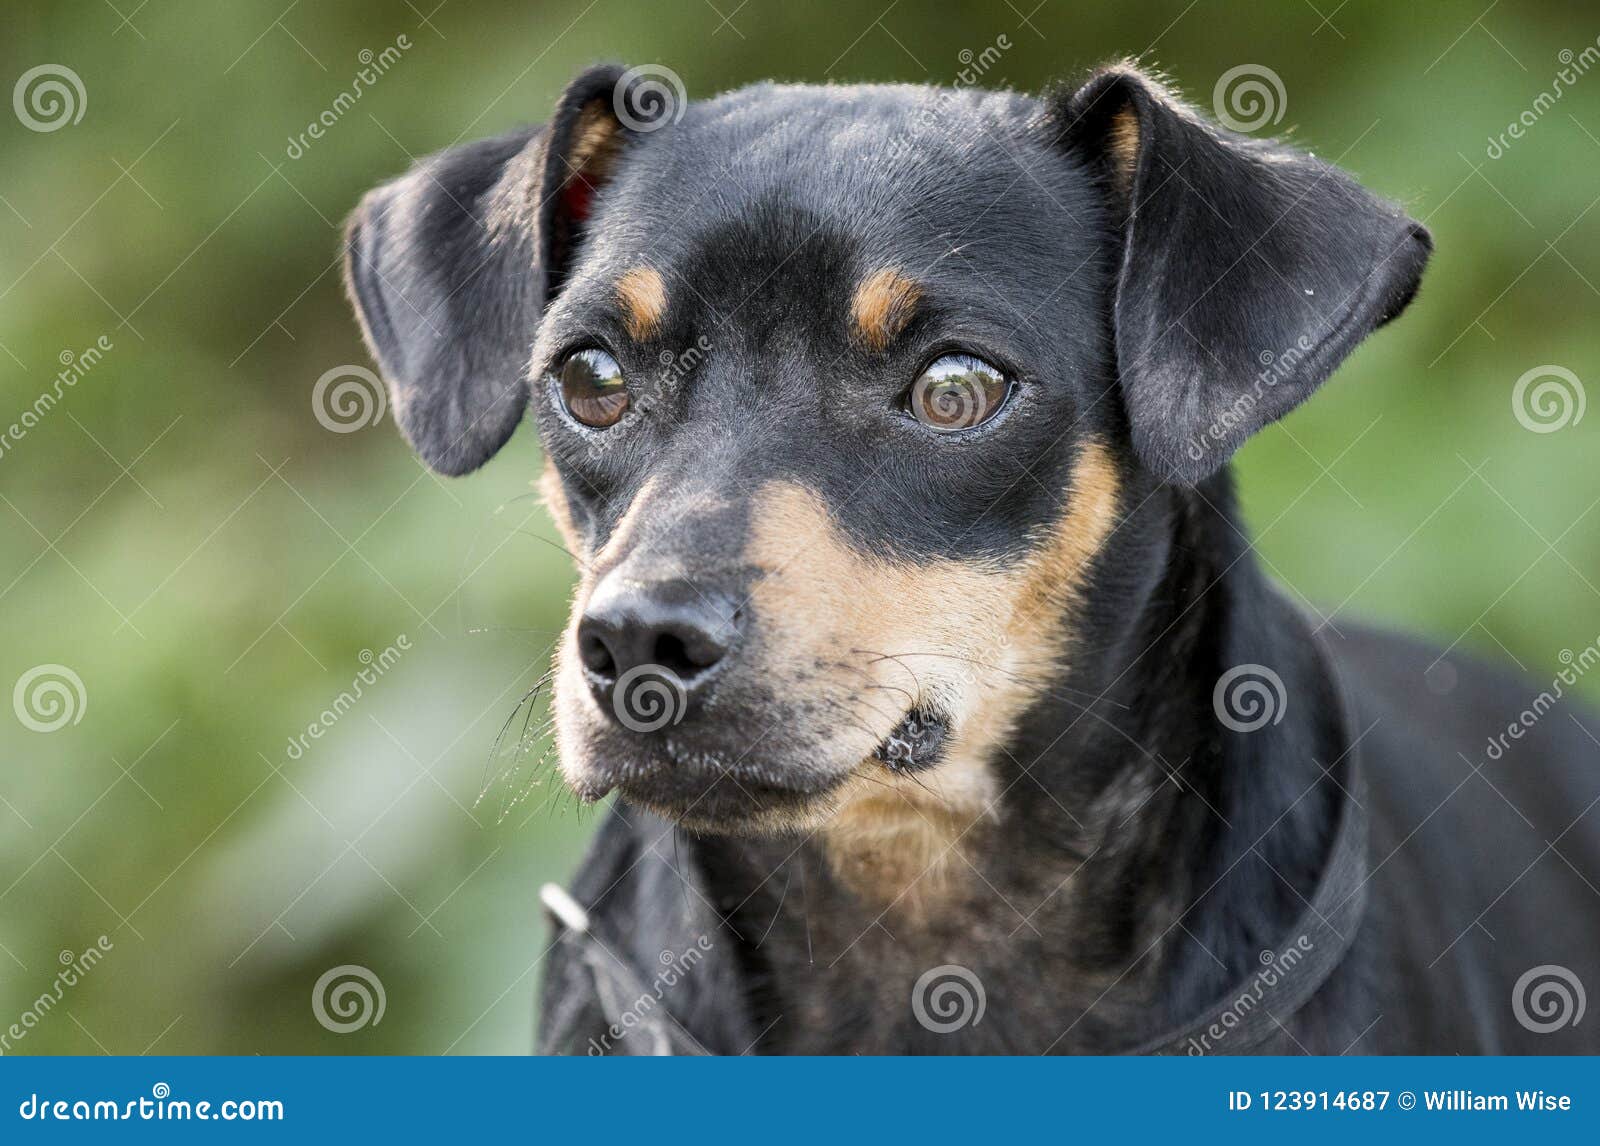 171 Manchester Terrier Dog Photos Free Royalty Free Stock Photos From Dreamstime